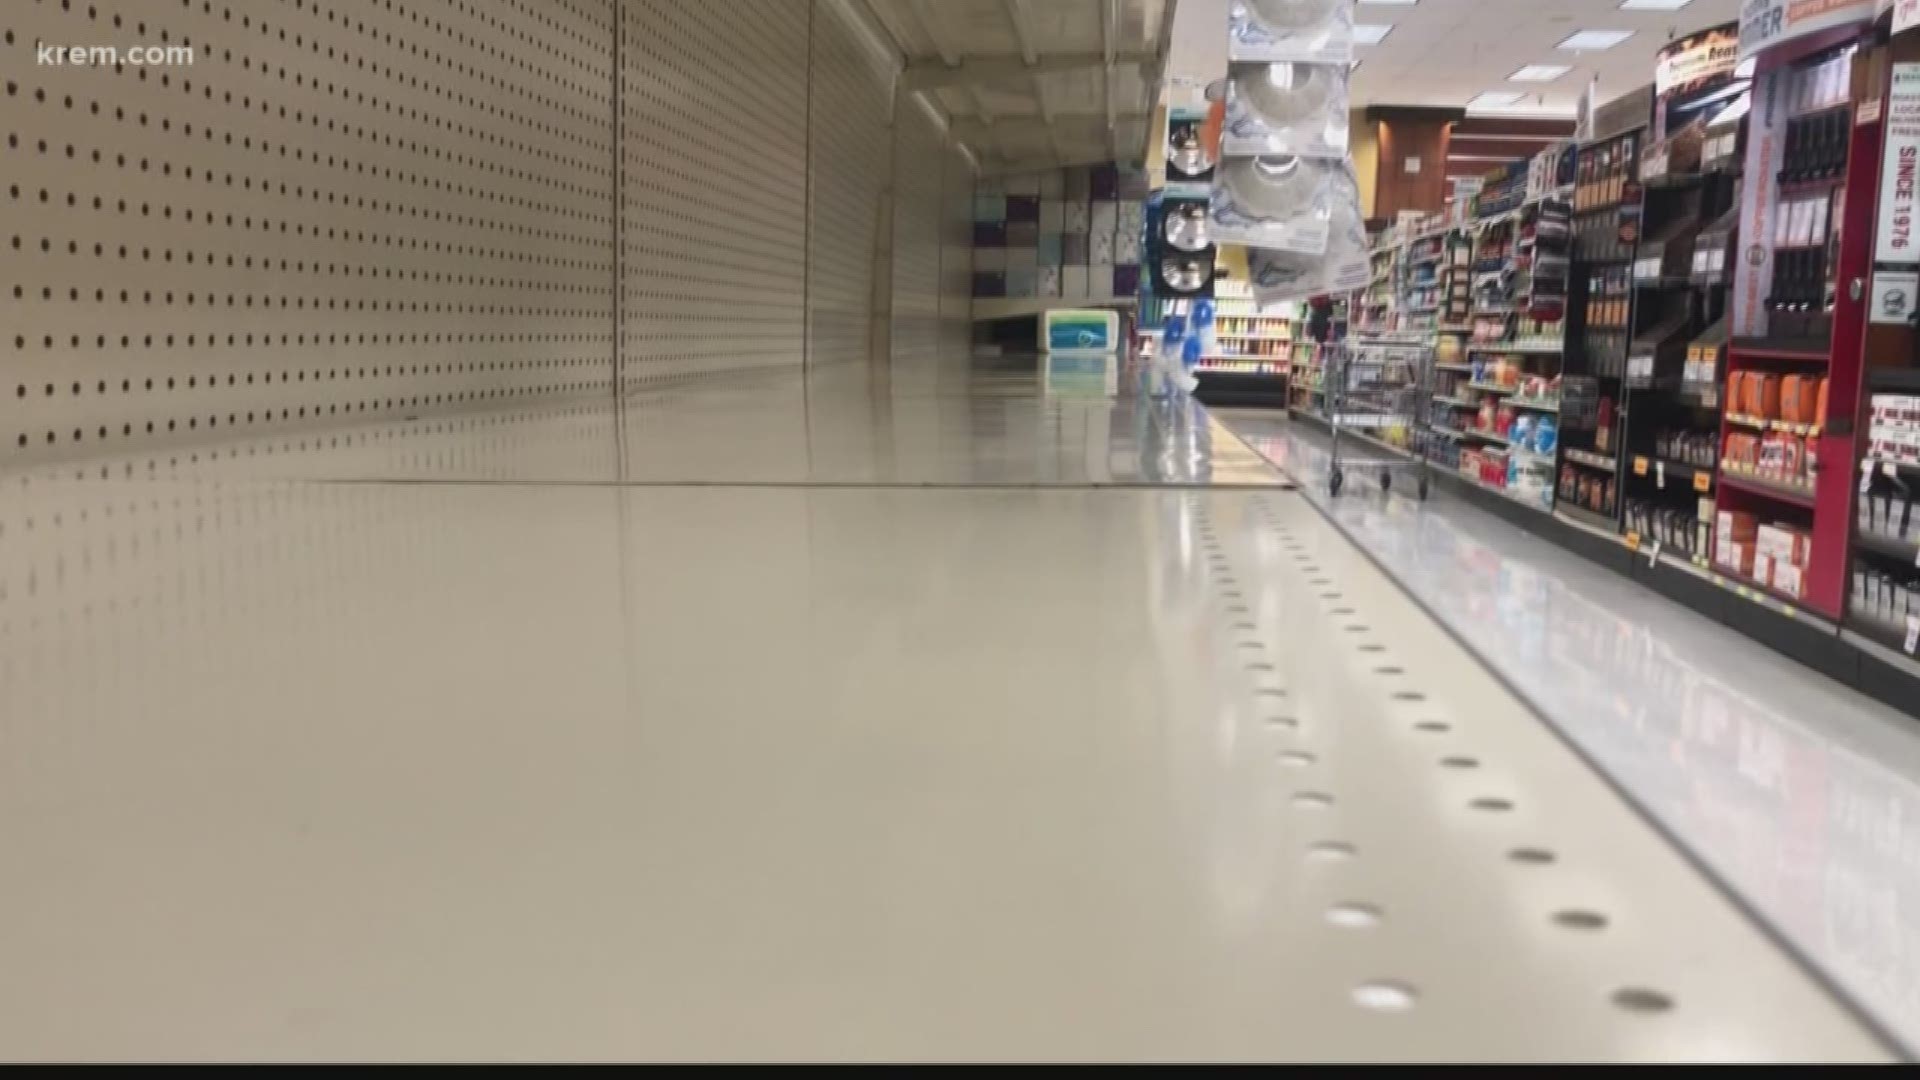 Customers around Eastern Washington are having trouble finding several items on their shopping list